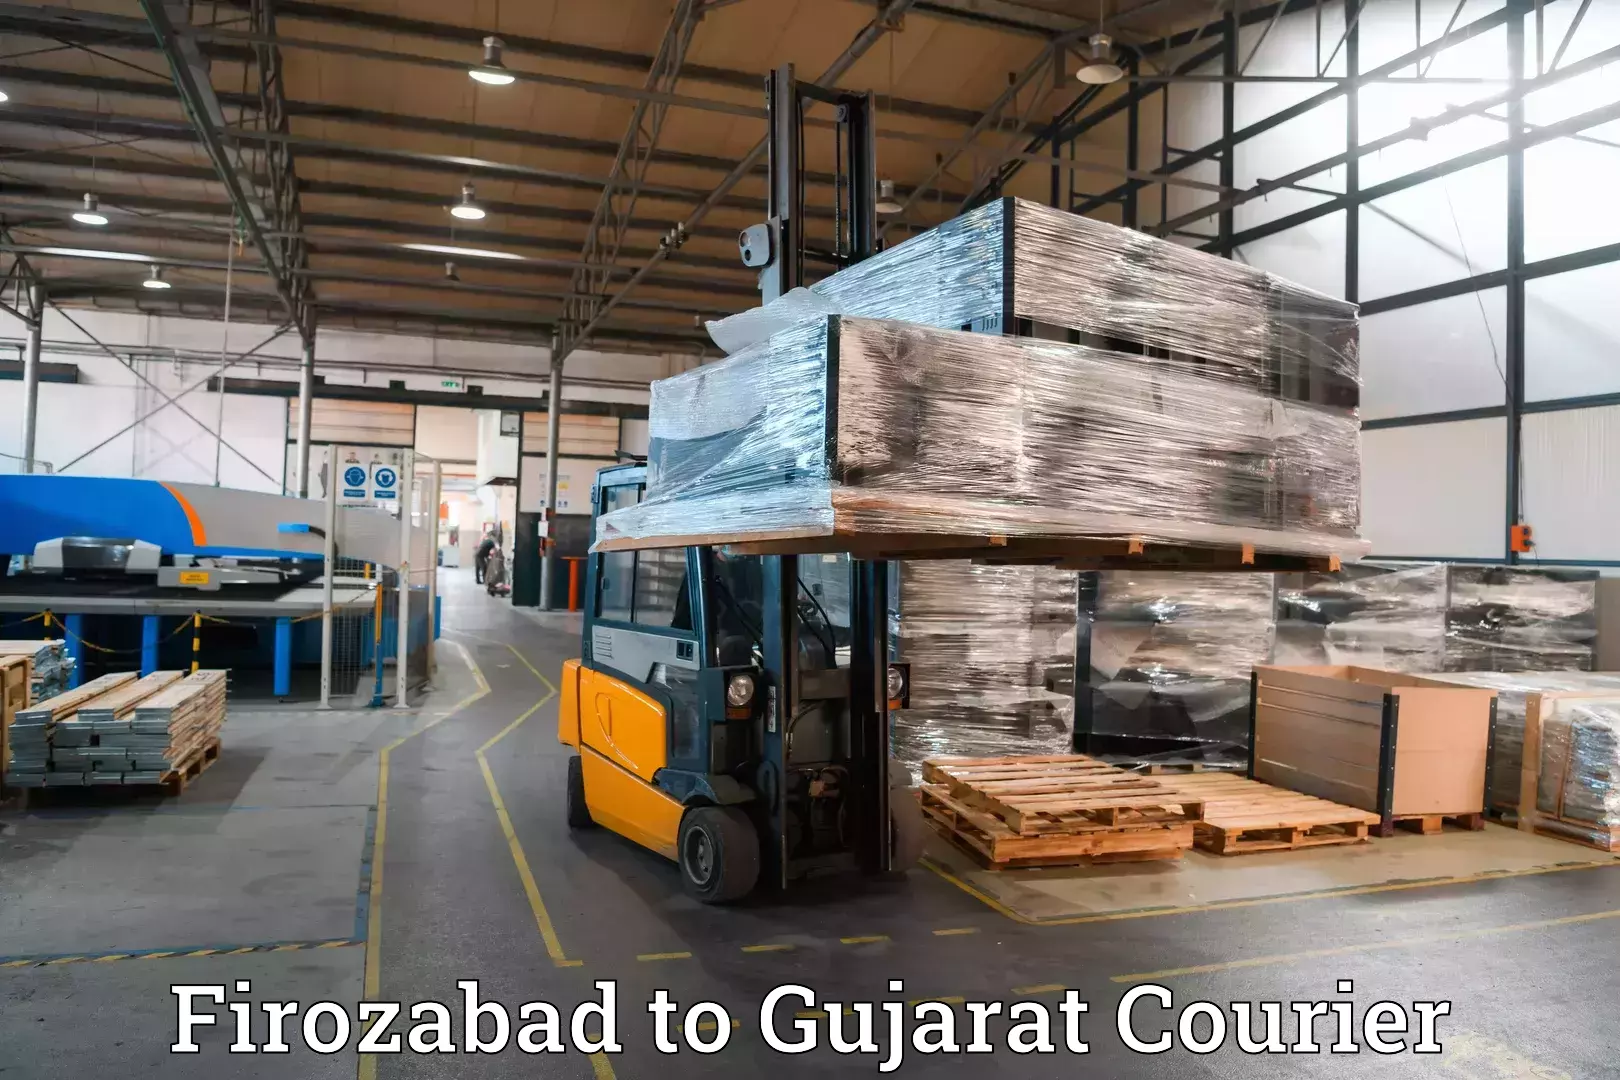 Luggage transport consultancy Firozabad to Gujarat